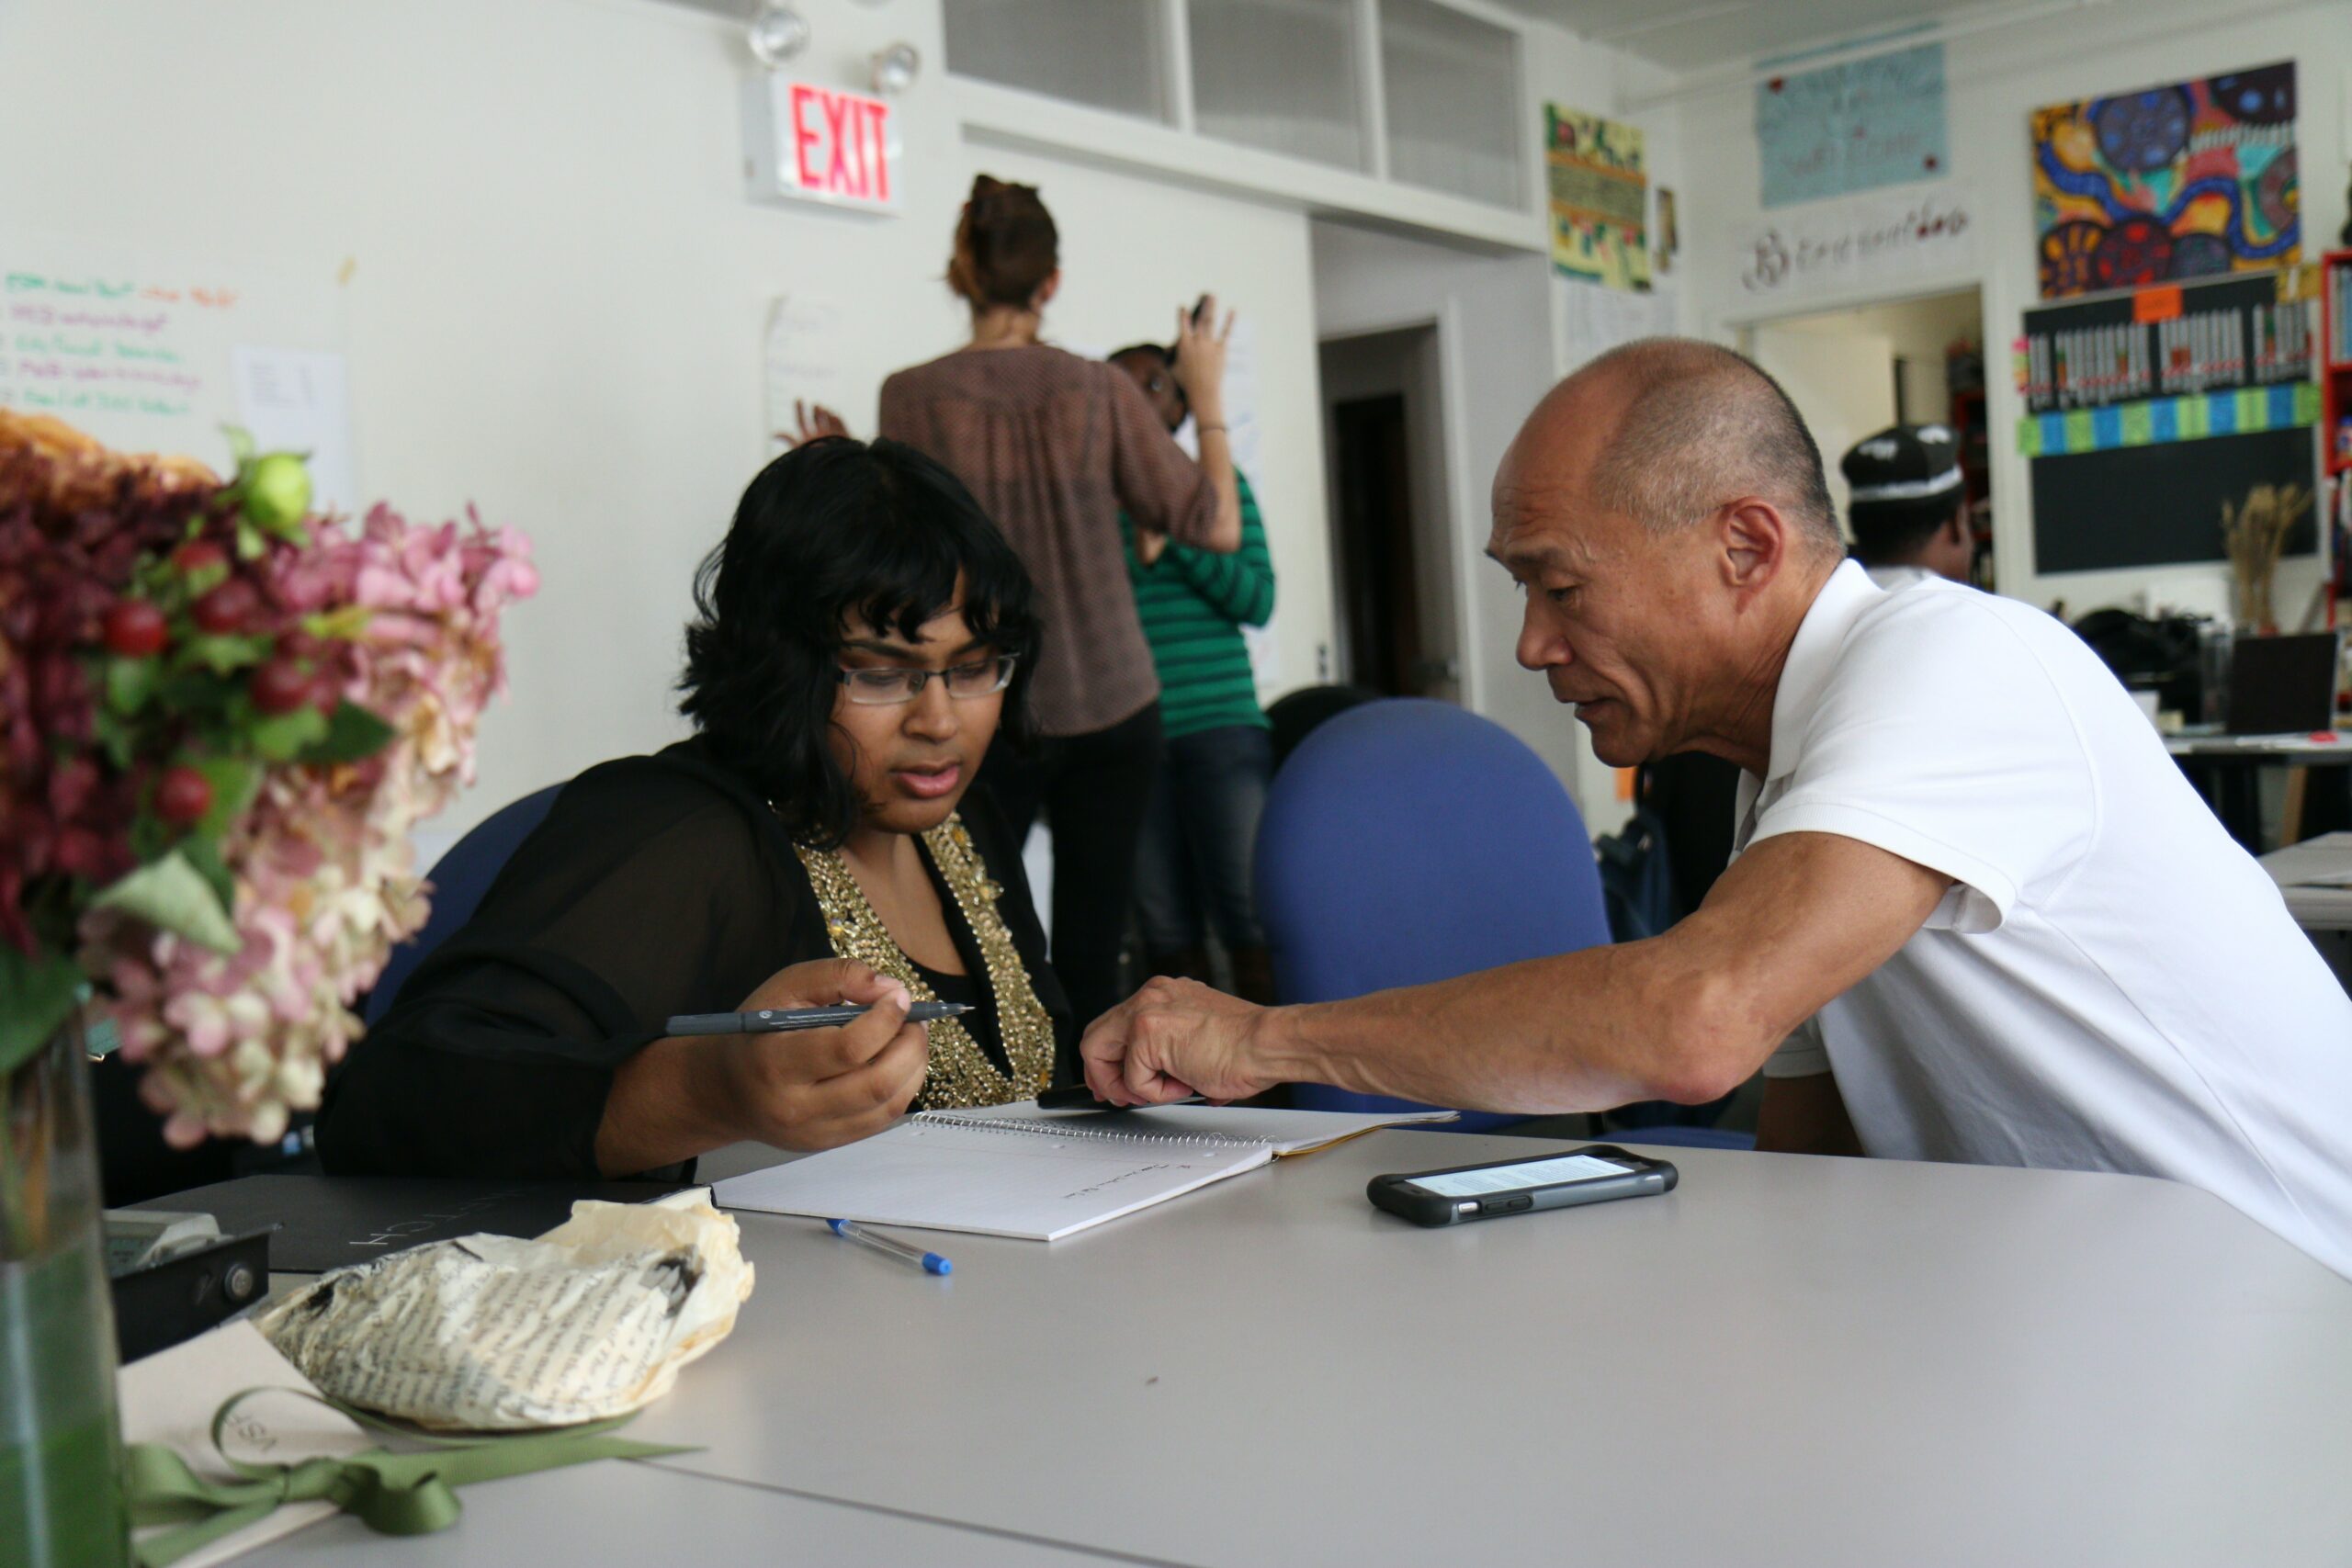 A man and a woman talking over documents at a table.